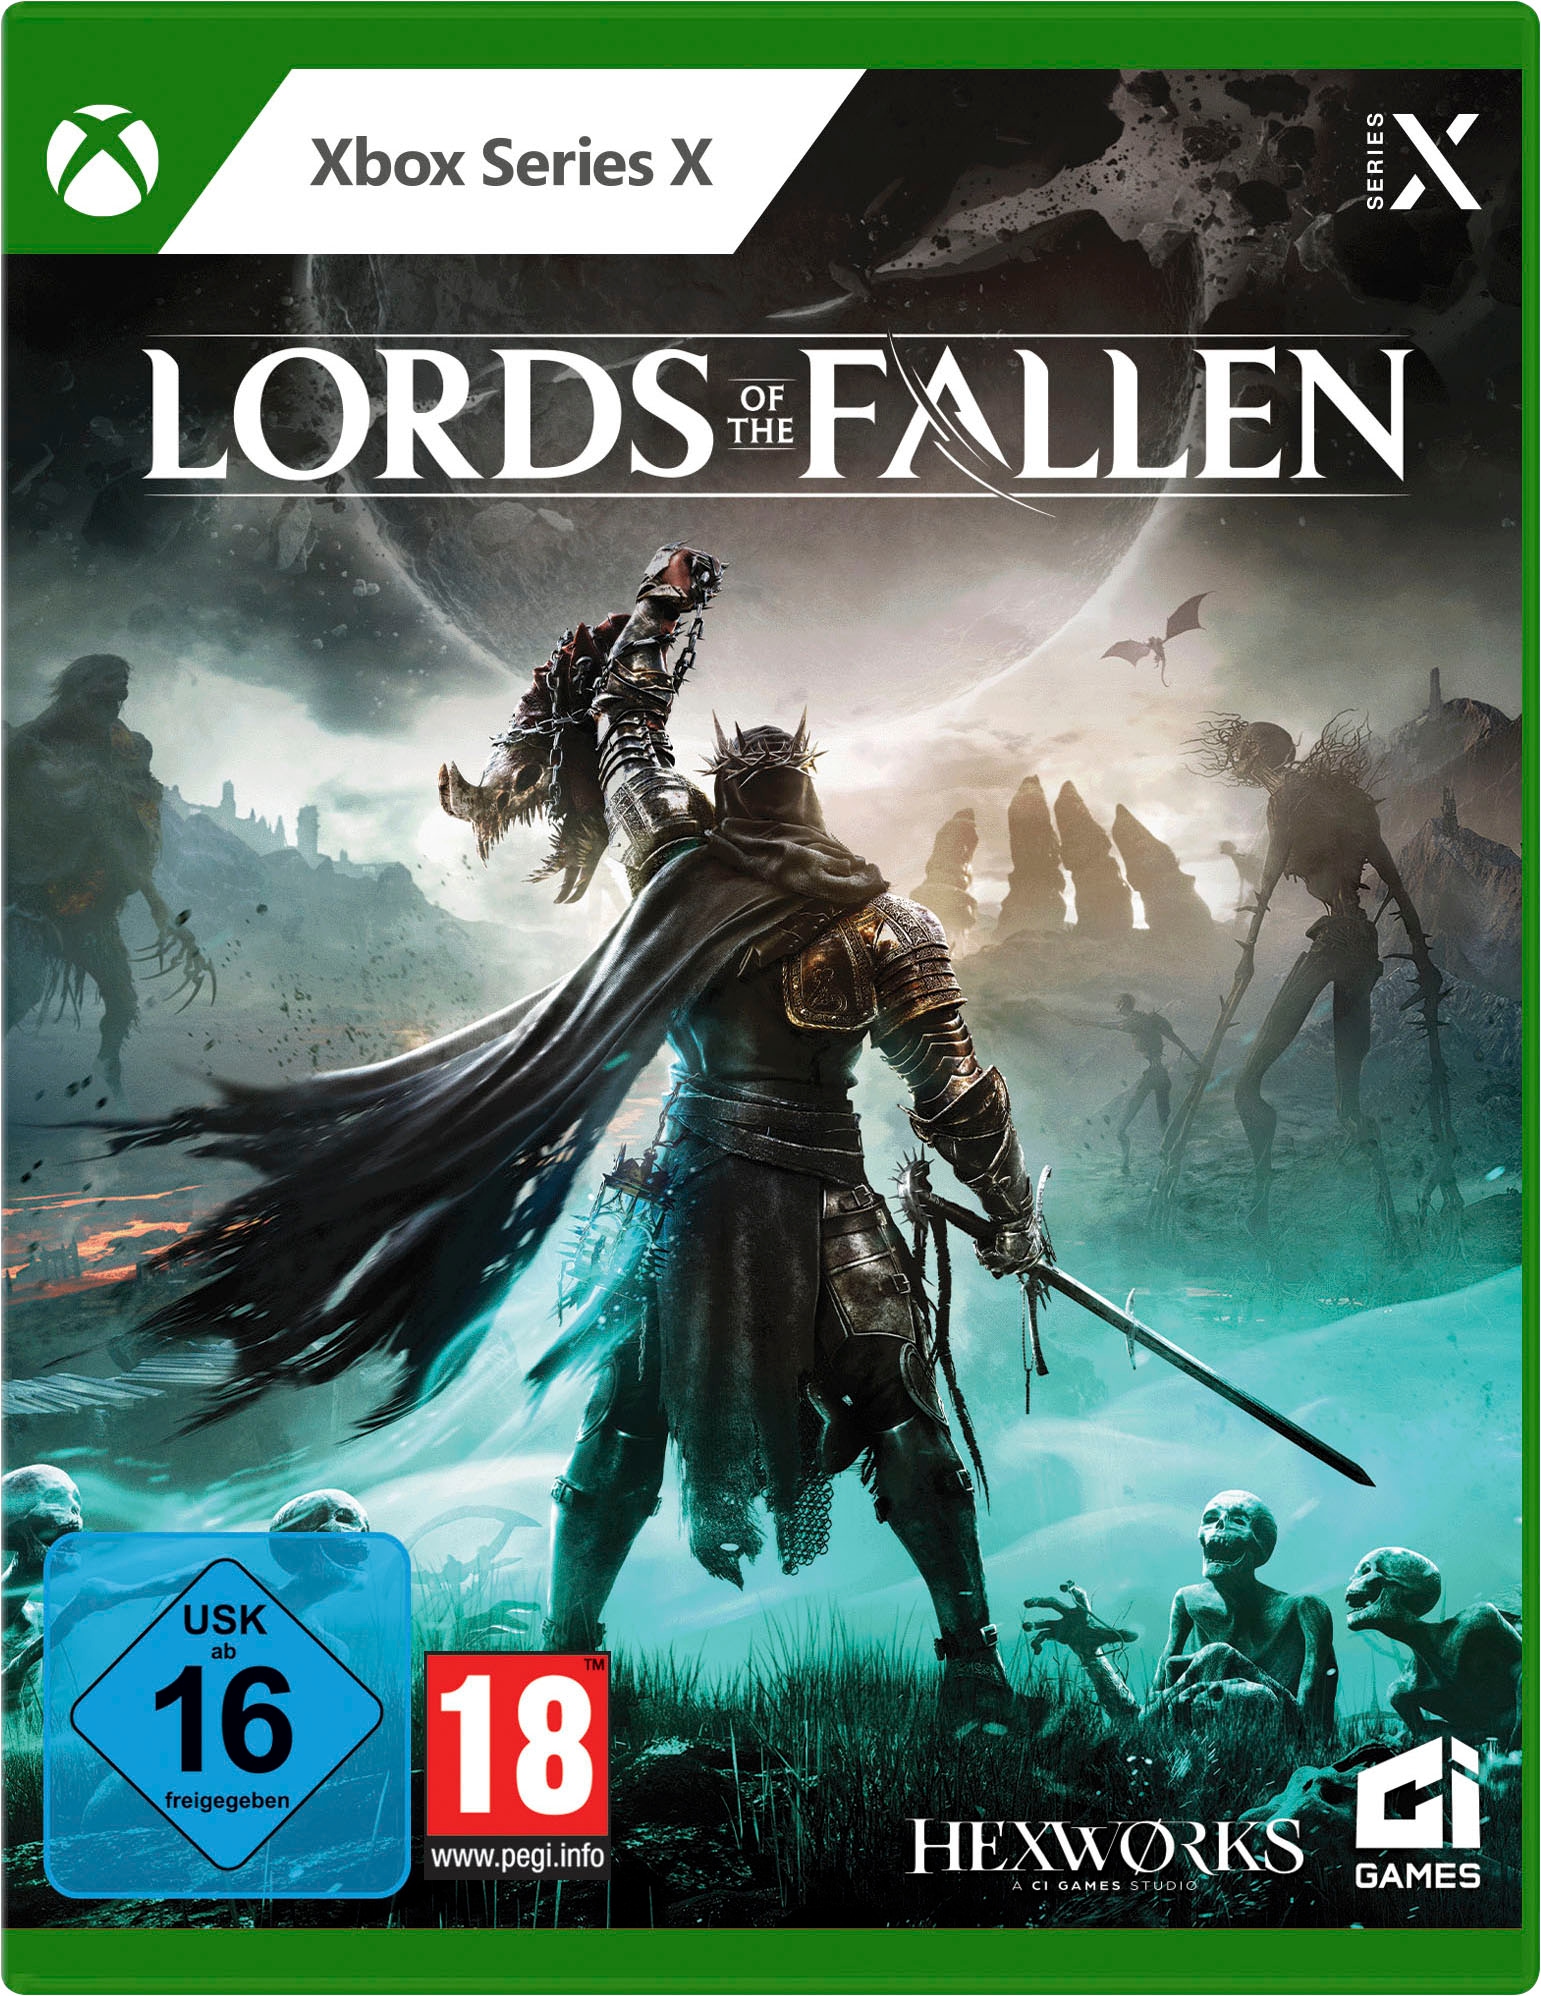 Spielesoftware »Lords of the Fallen«, Xbox Series X